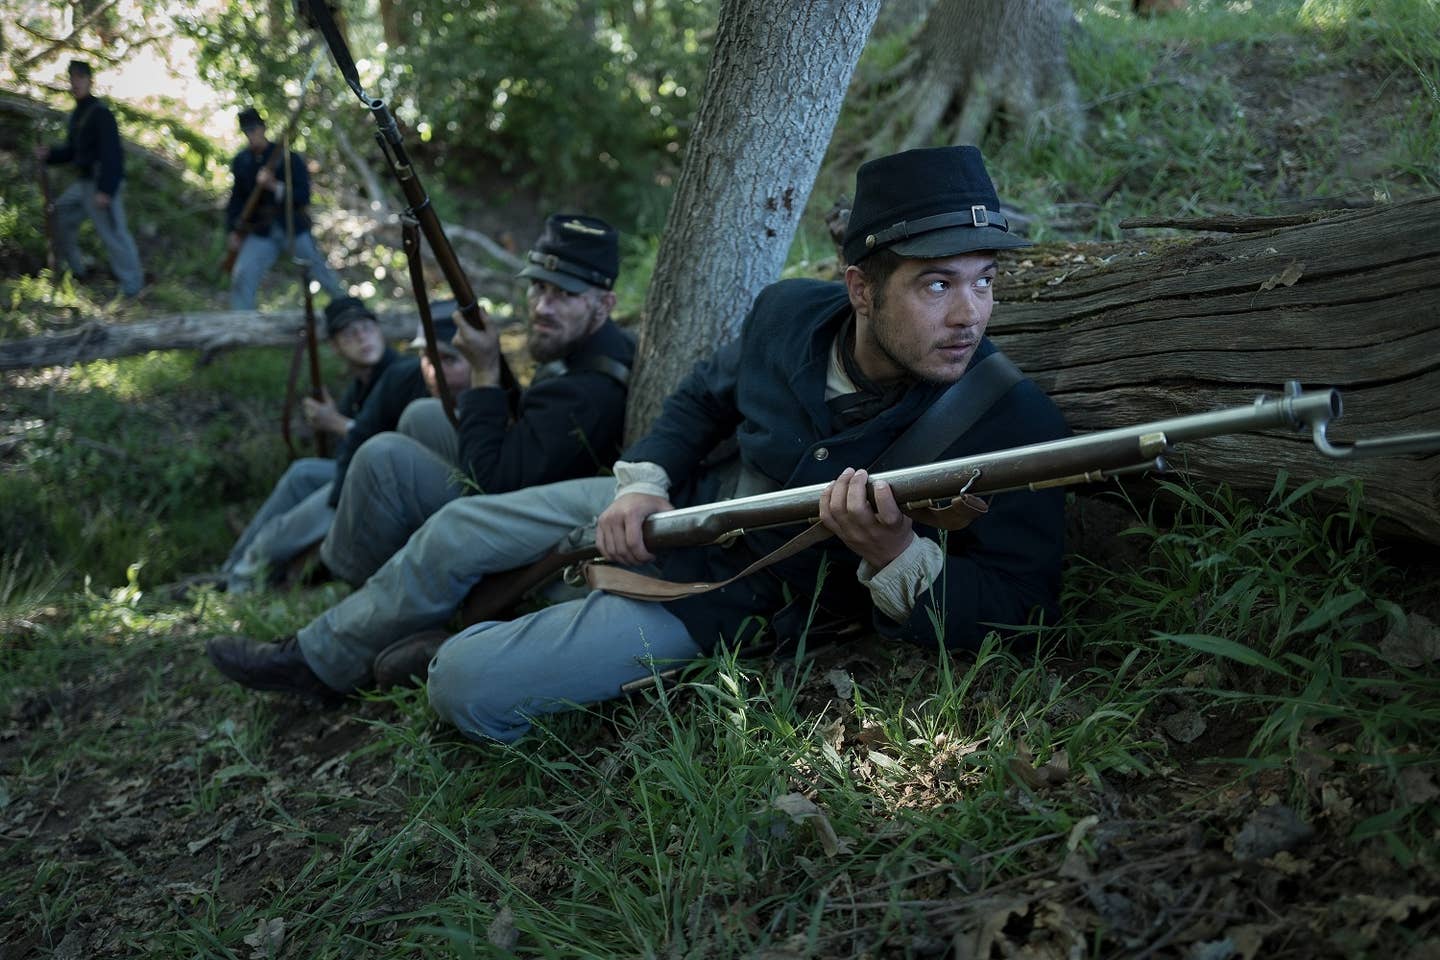 Interview with HISTORY&#8217;s Garry Adelman: &#8216;GRANT&#8217; 3-night miniseries event starting Memorial Day